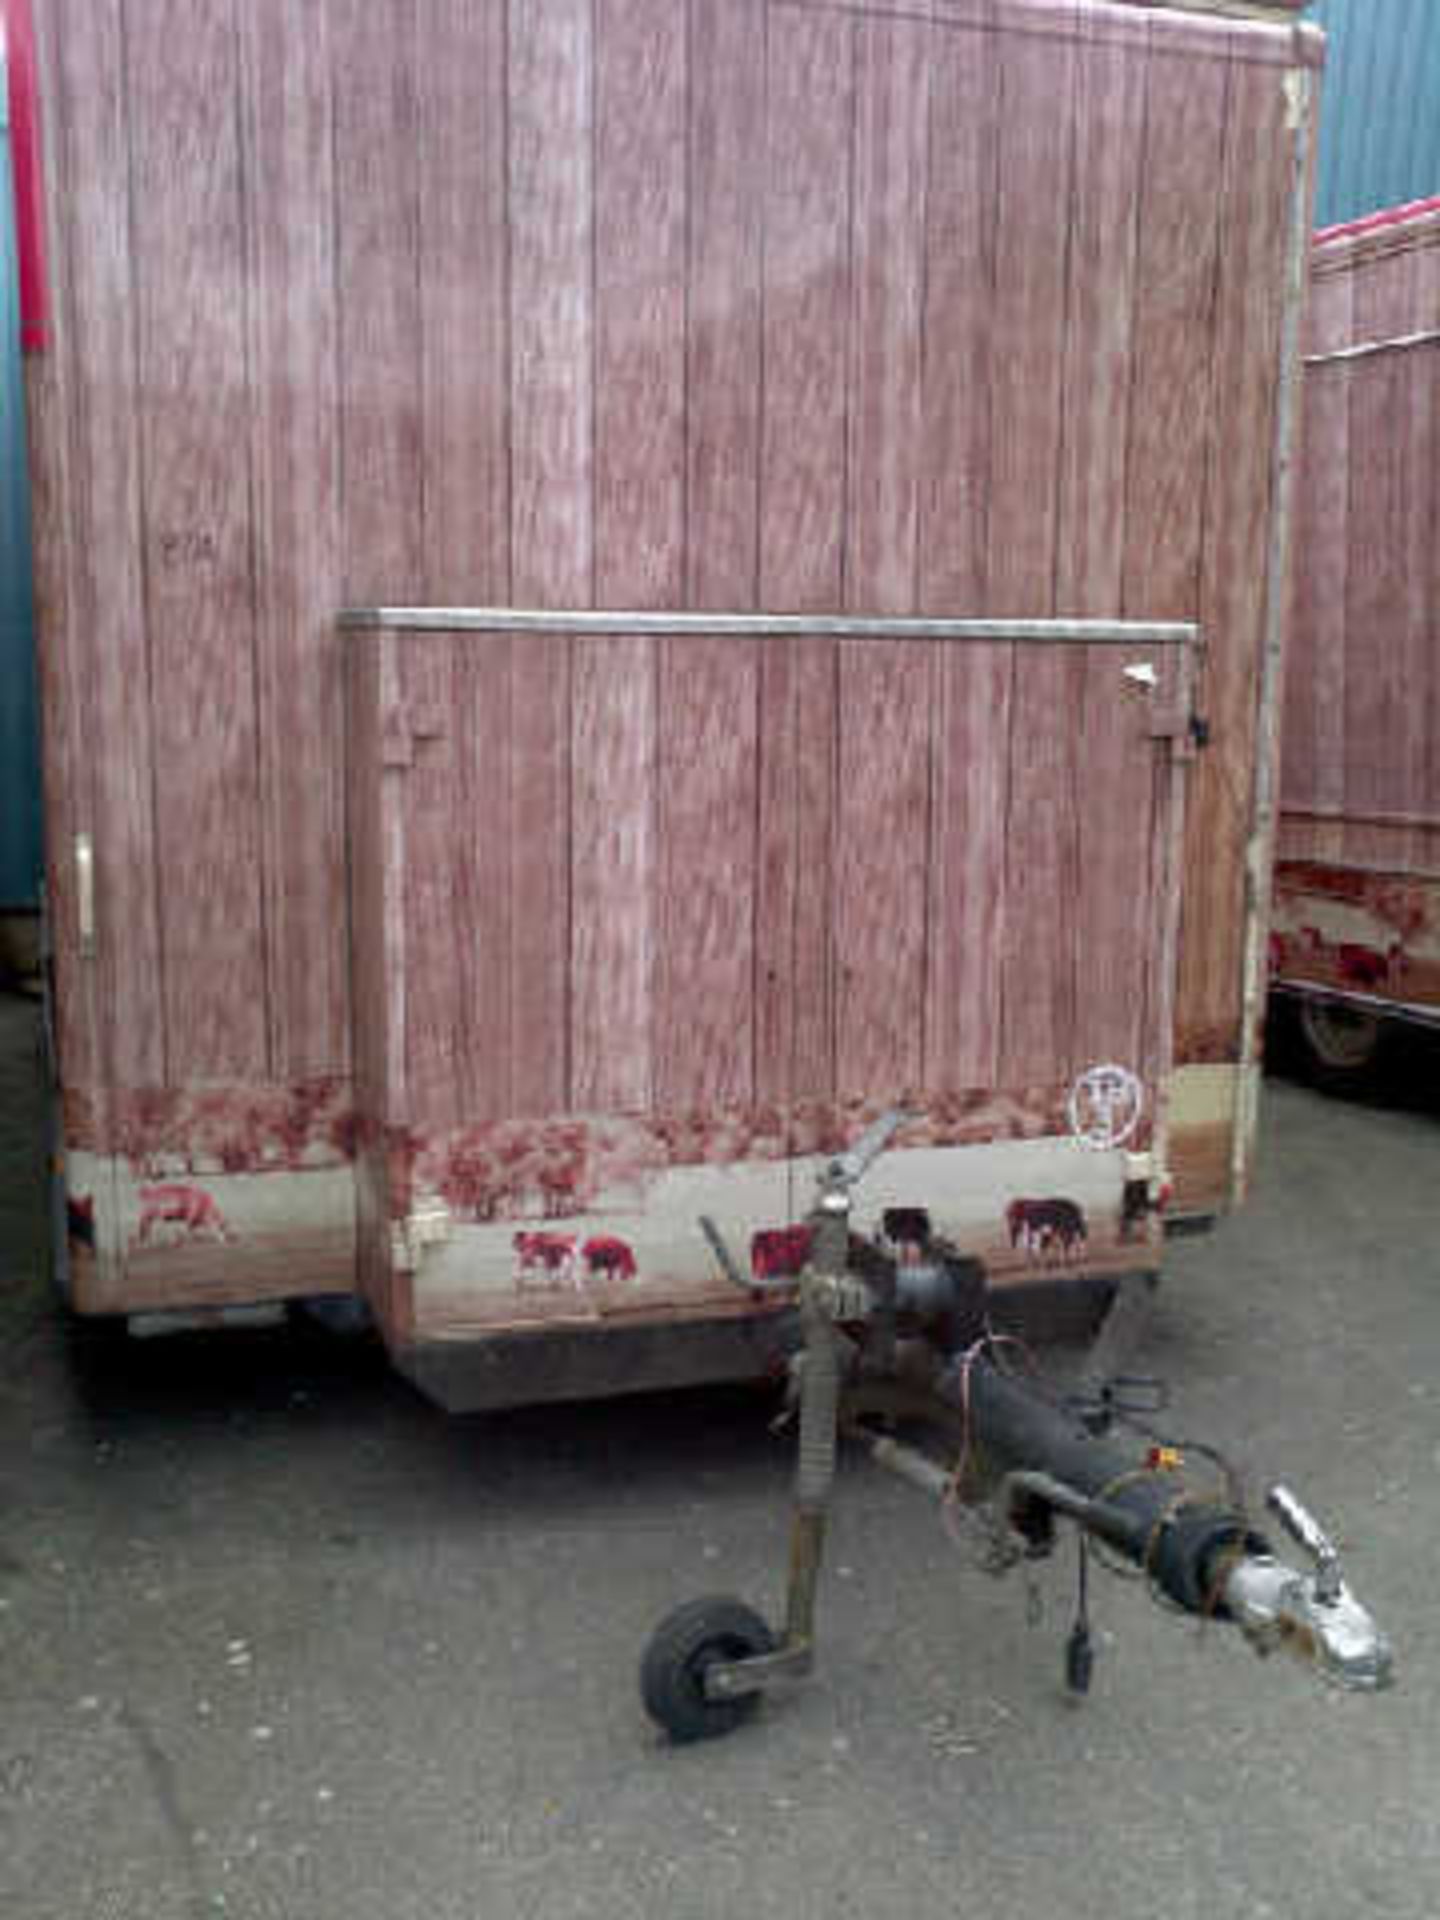 LARGE DOUBLE AXLE CATERING TRAILER WITH FULLY FITTED INTERIOR UNIT LENGTH 4.6M X2.4M WIDE, OVERAL - Image 2 of 8